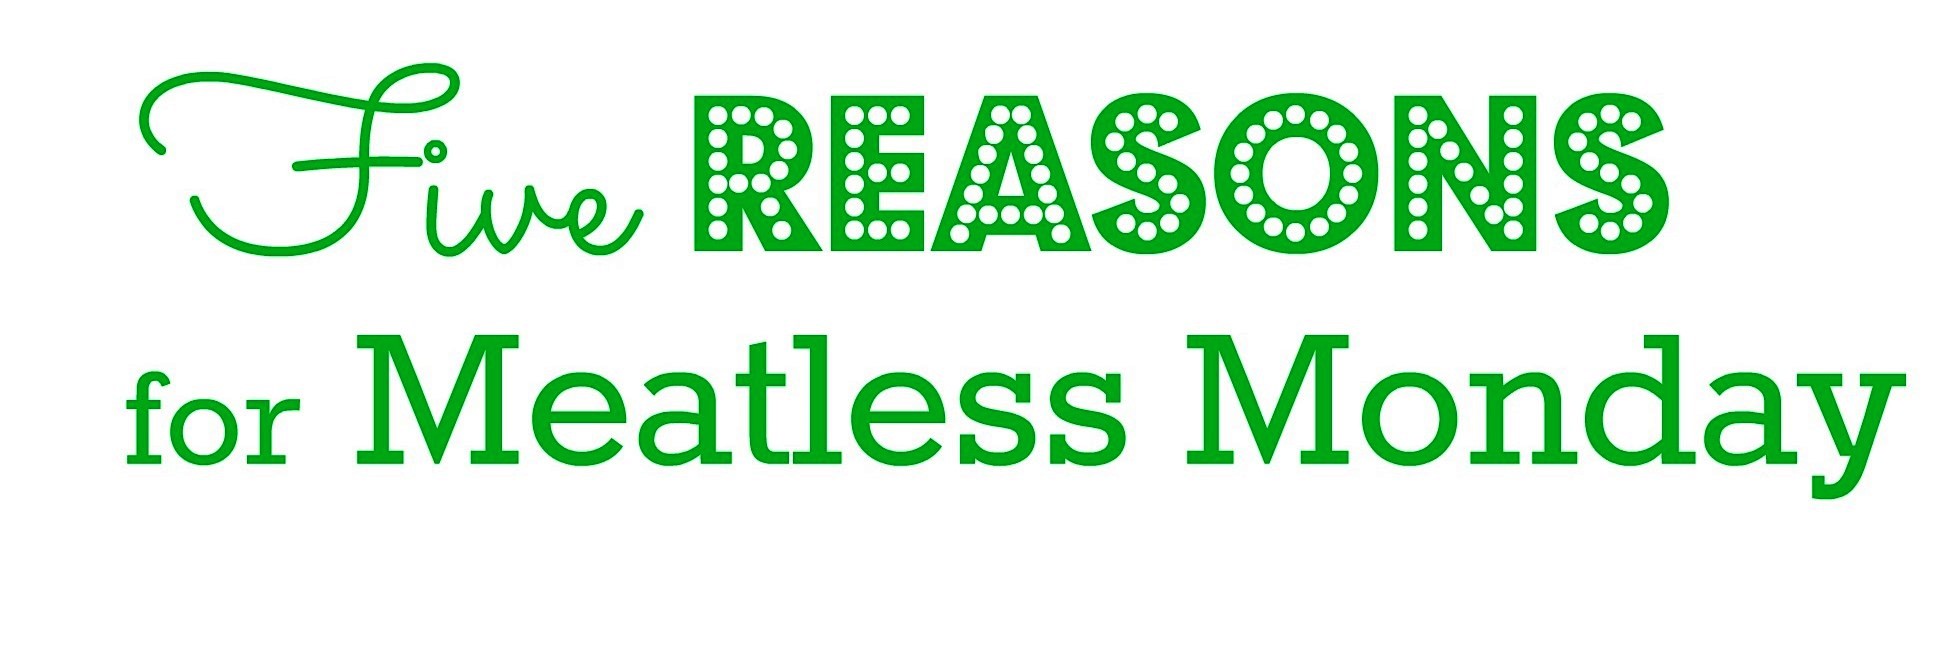 five-reasons-for-meatless-monday-1